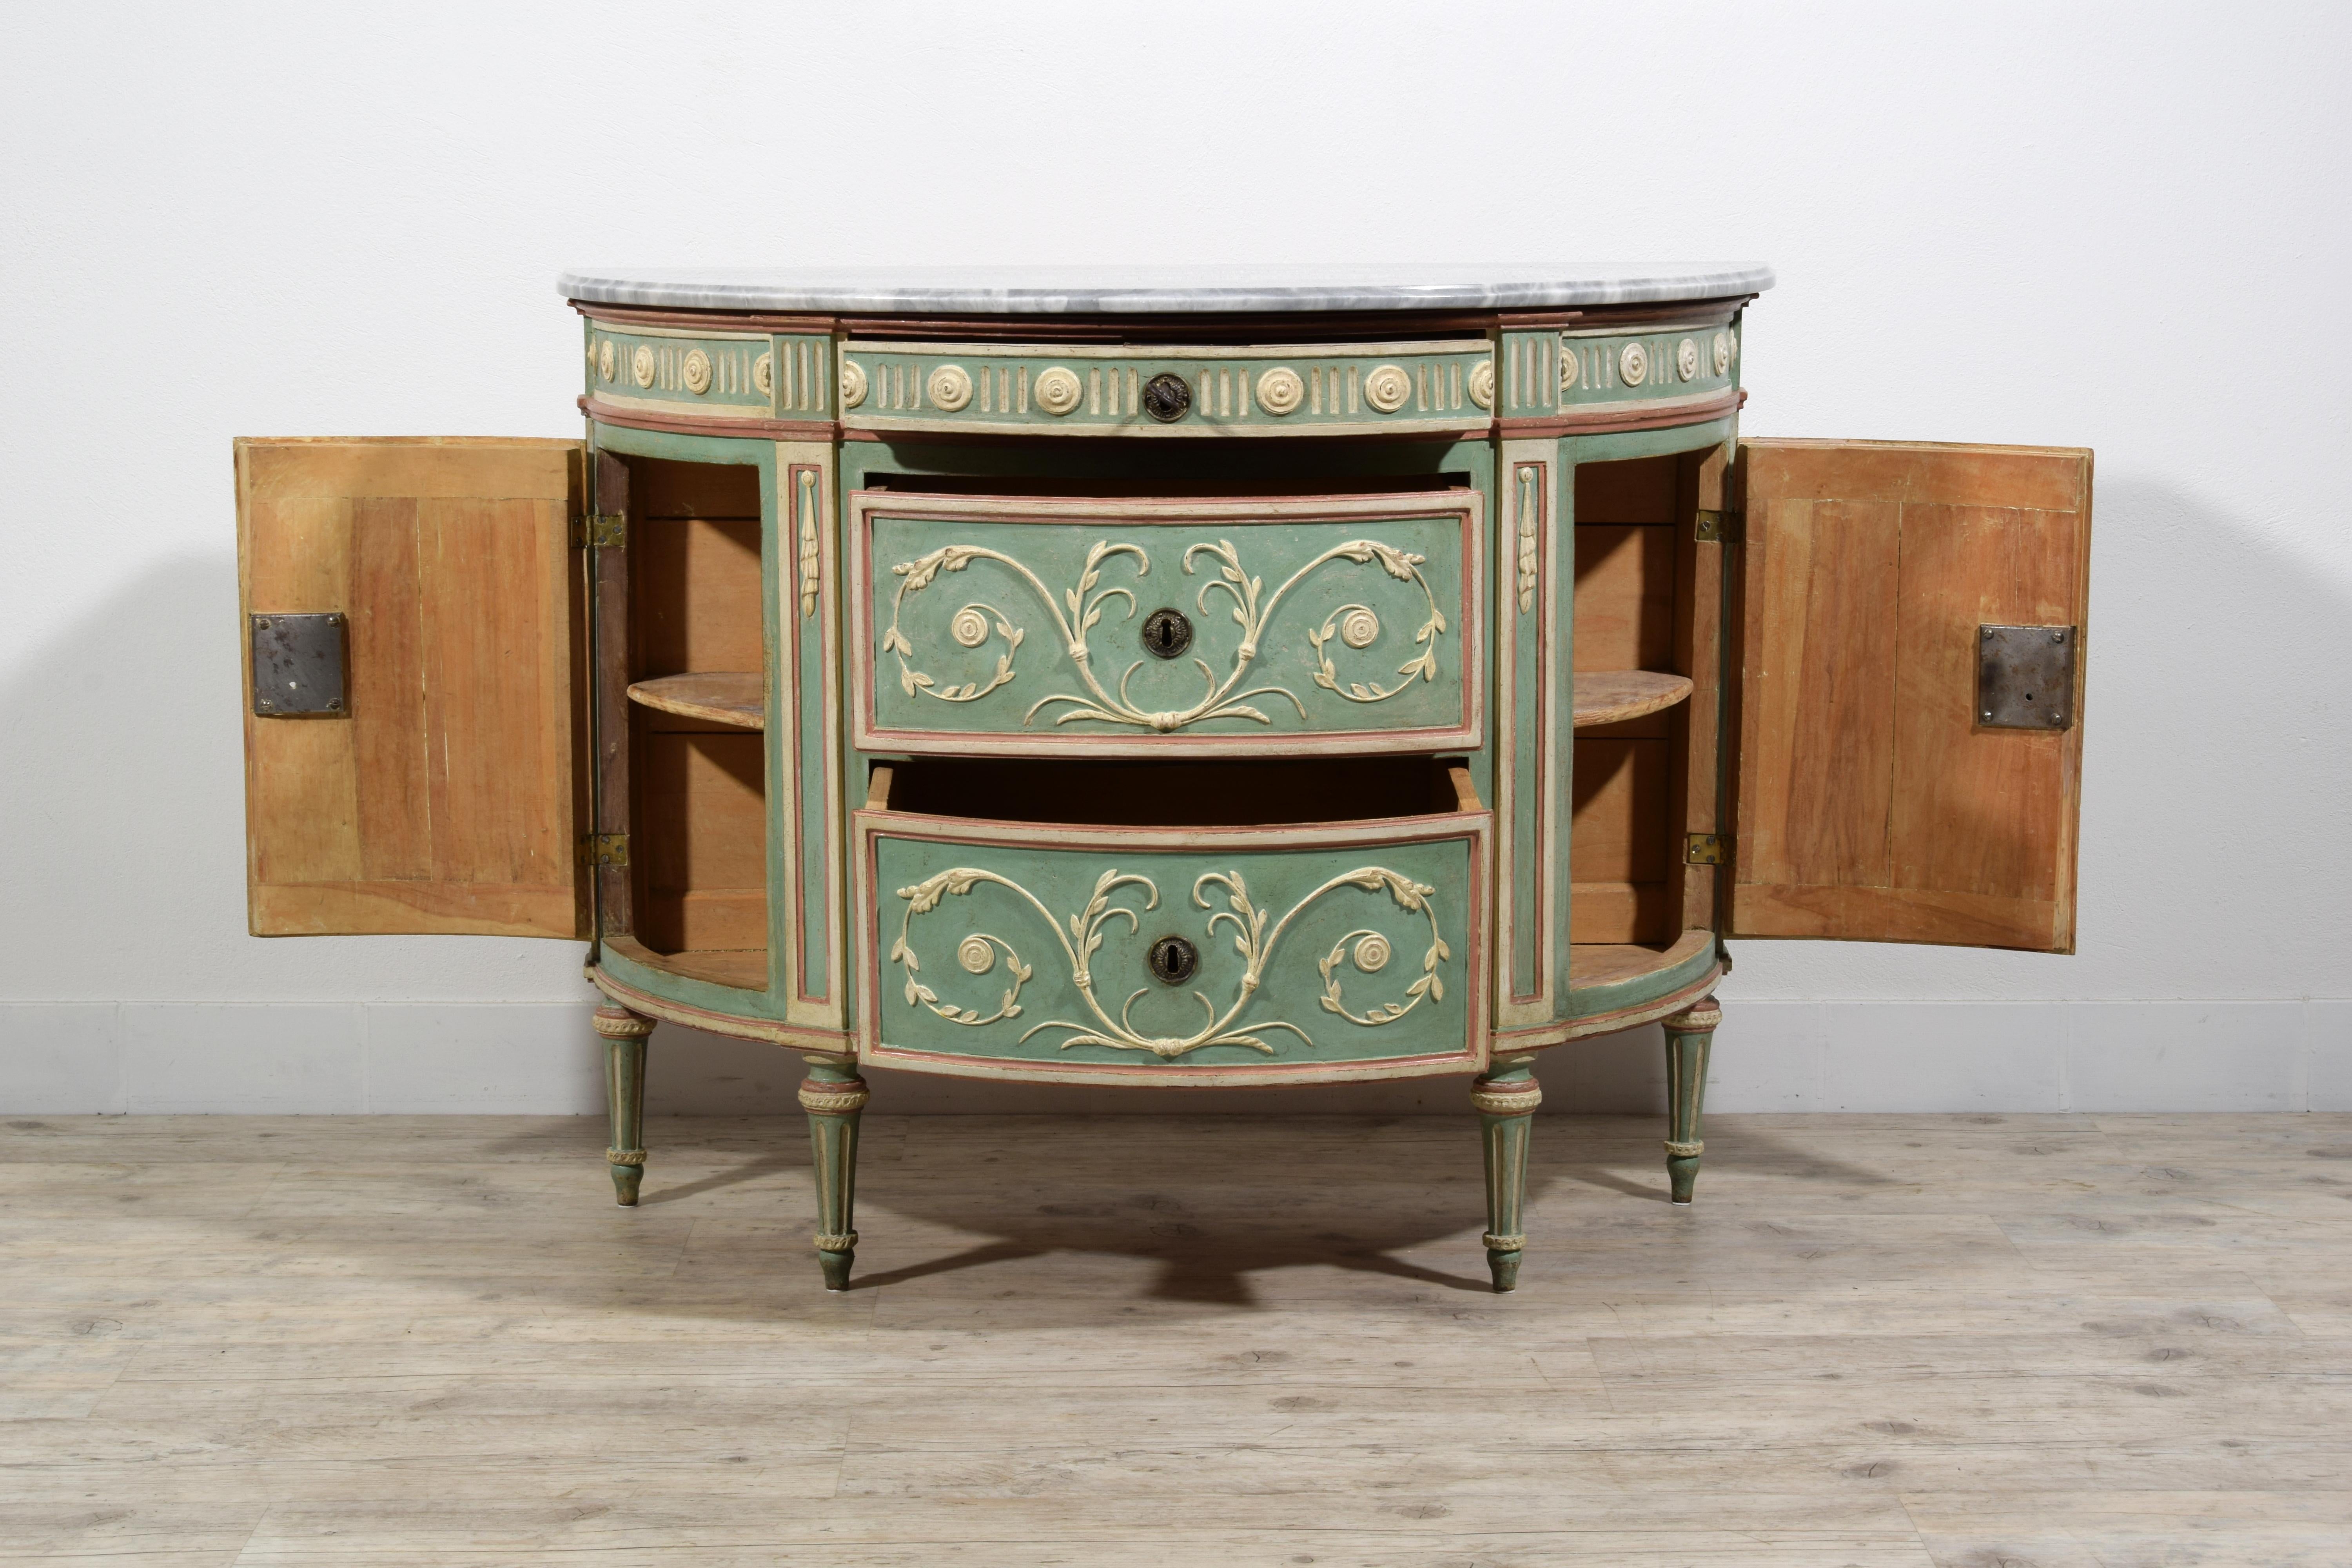 18th century, Italian Half-moon Lacquered Wood Chest of Drawers For Sale 1